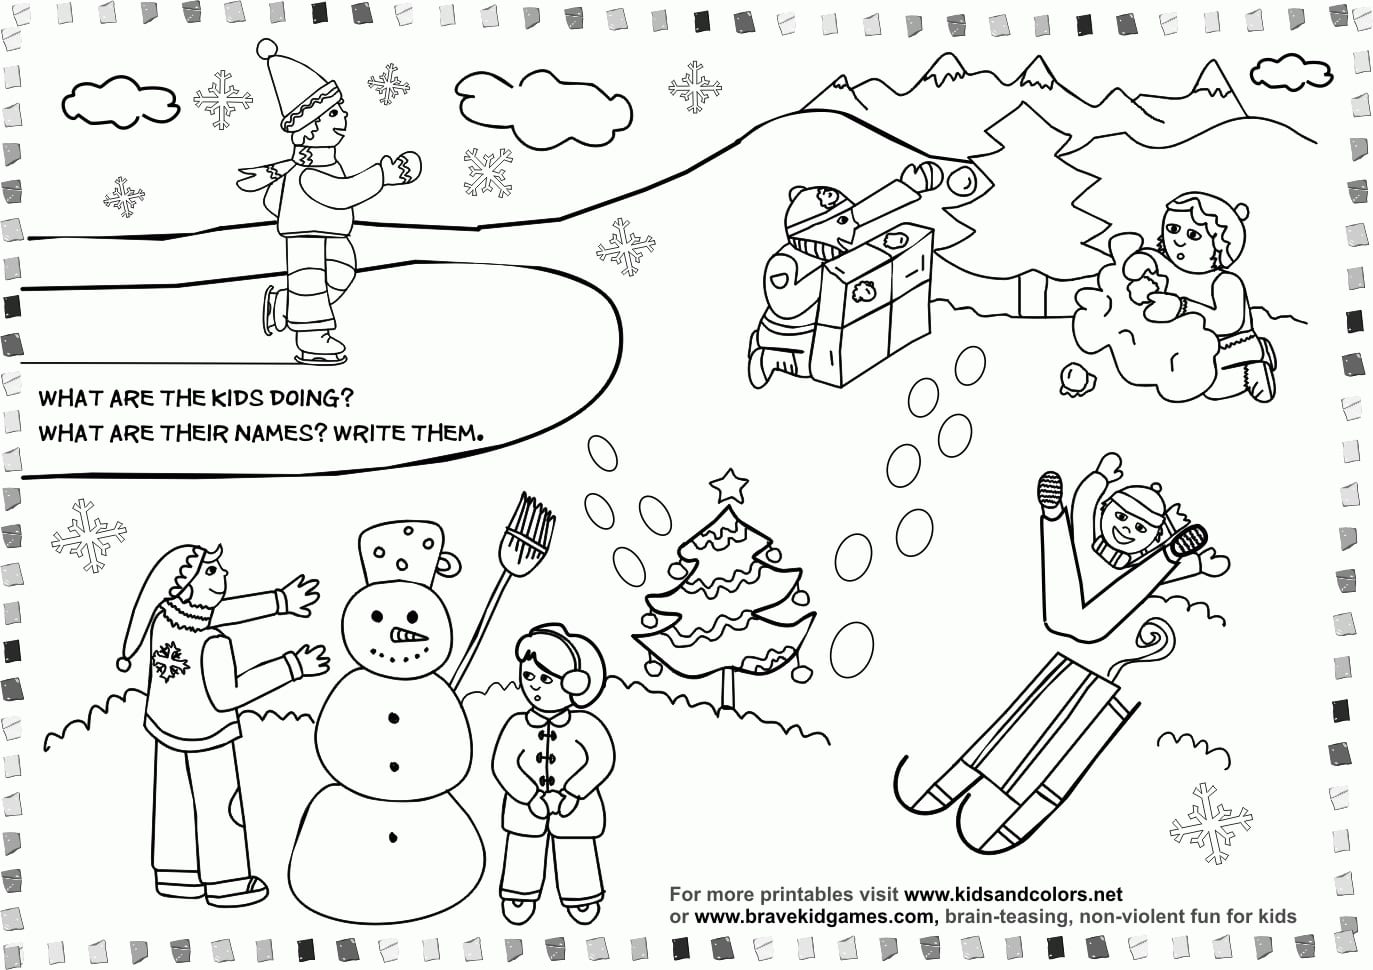 Winter Season Coloring Pages  Crafts And Worksheets For Preschool For Winter Worksheets For Preschoolers